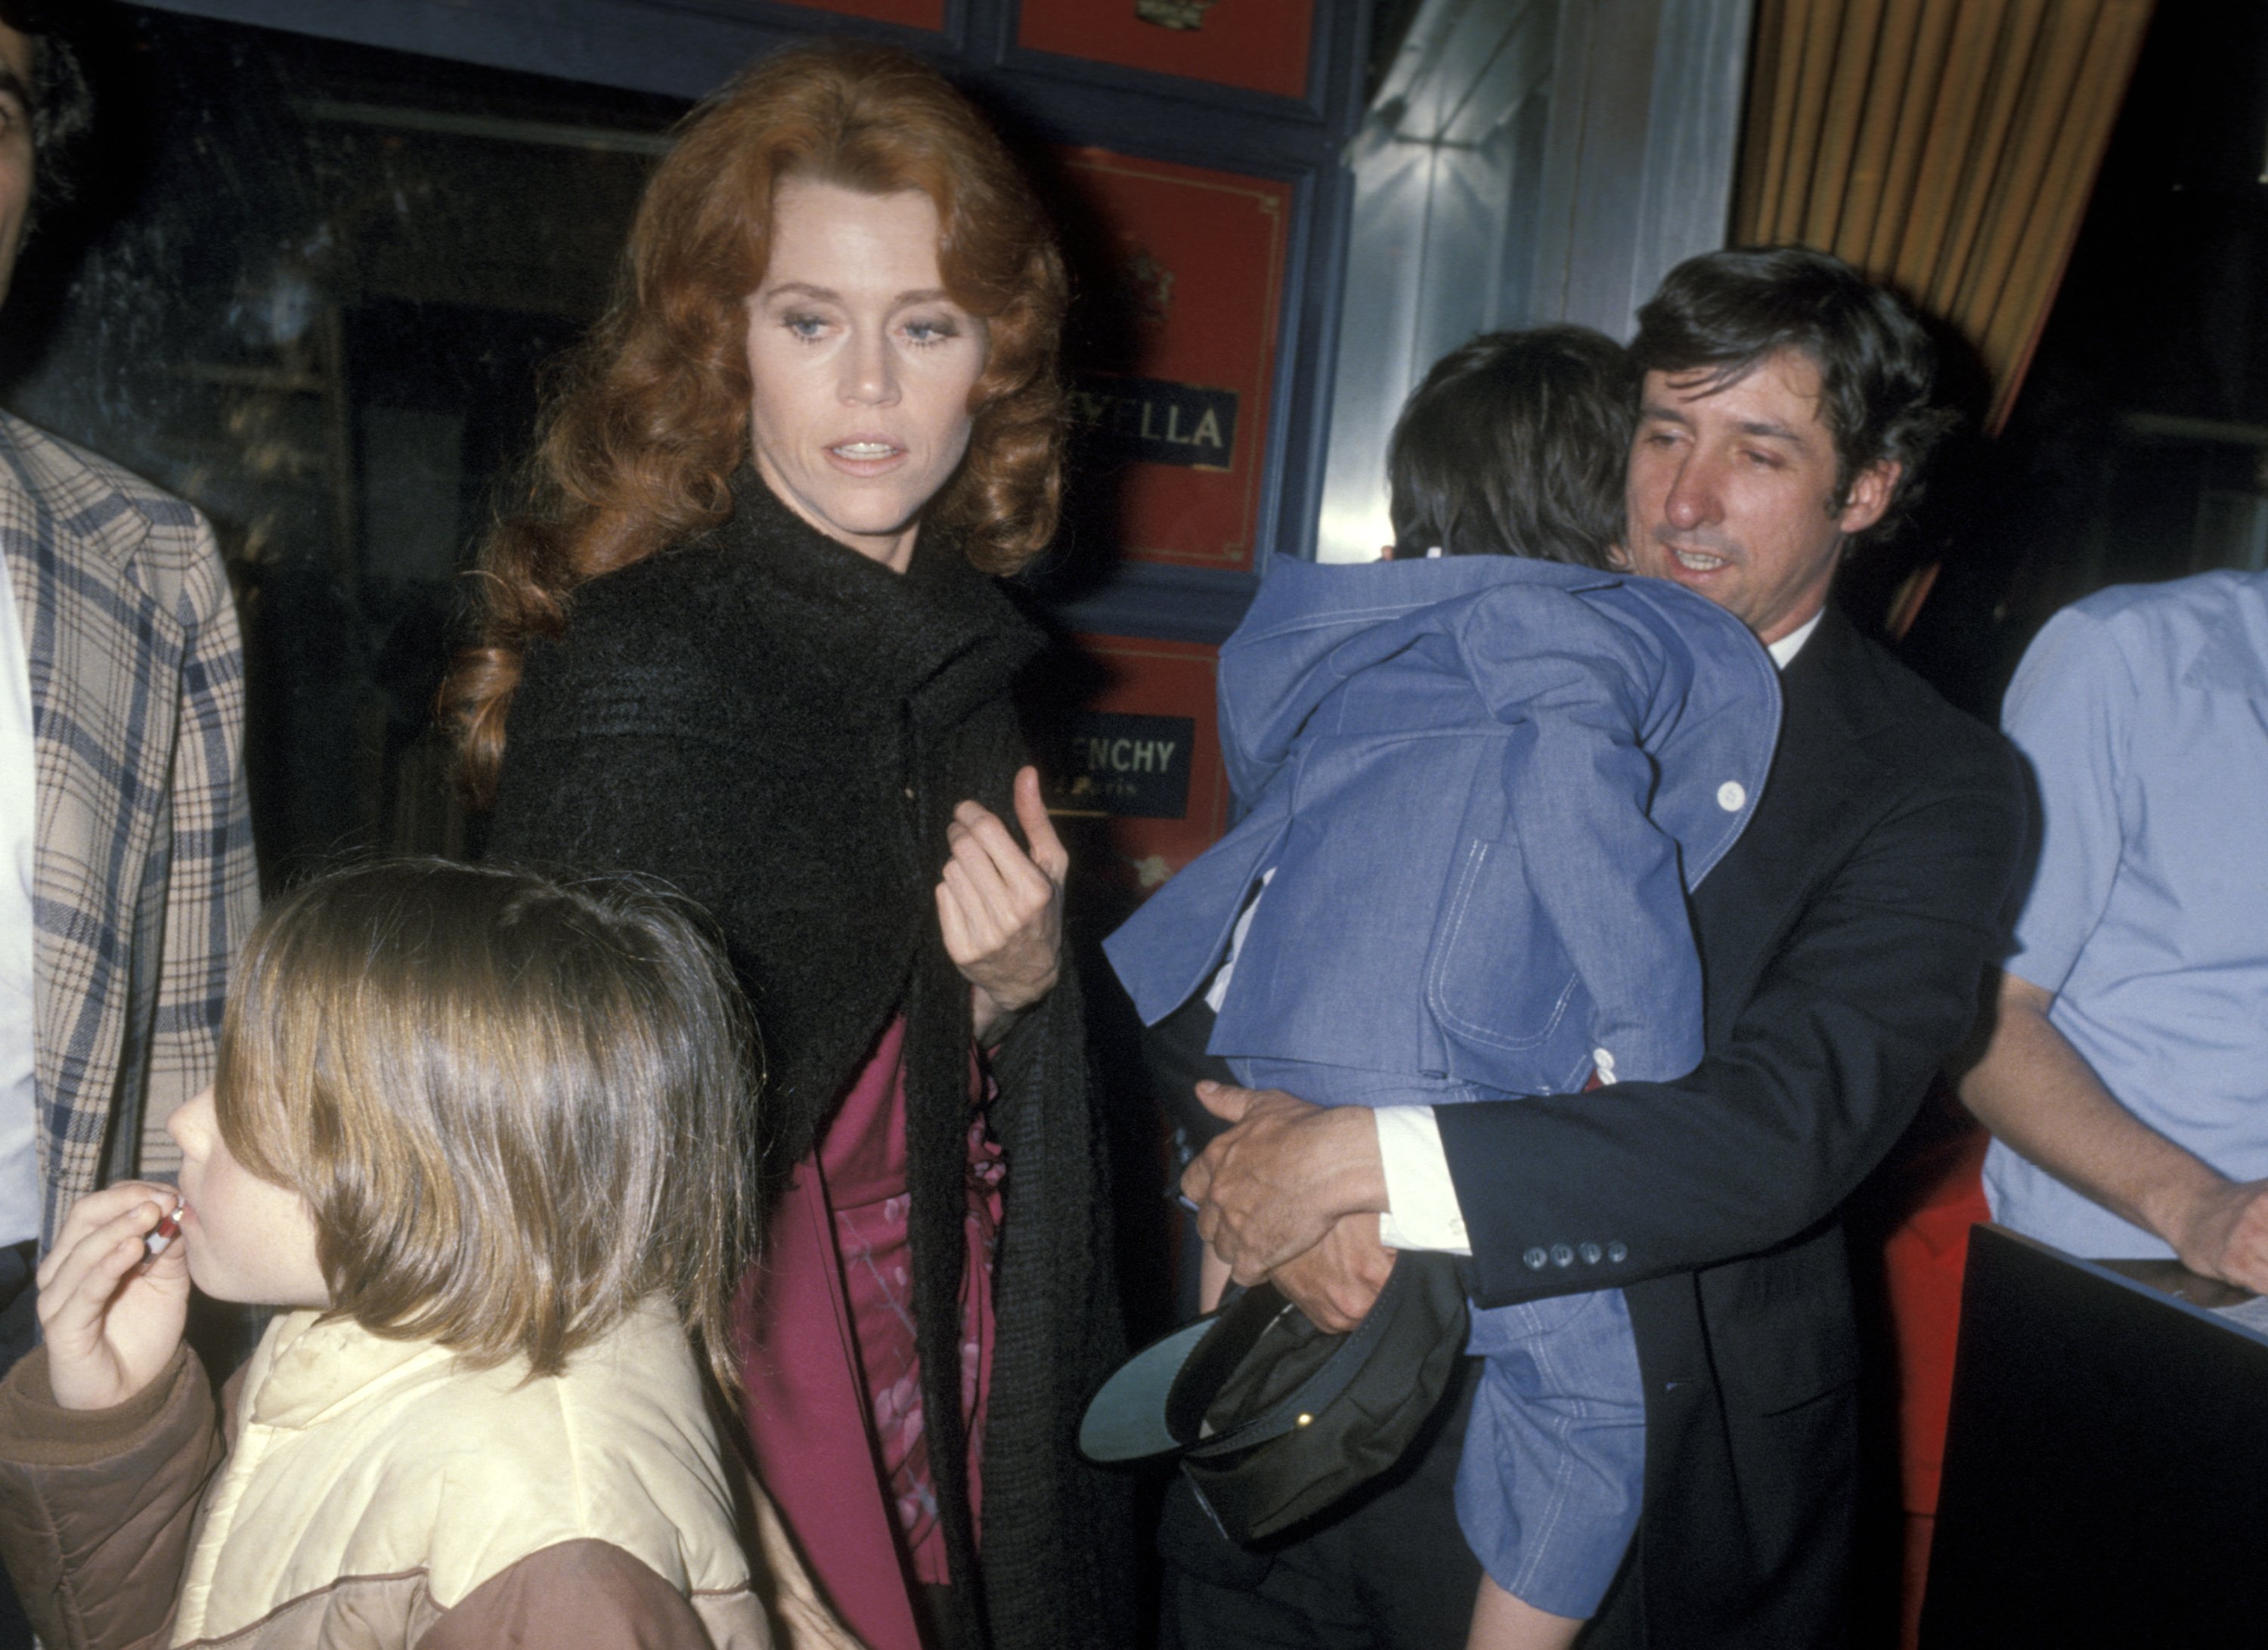 Jane Fonda with Tom Hayden and their children Vanessa Vadim and Troy Hayden at the American film institute in 1978. |  Source: Getty Images